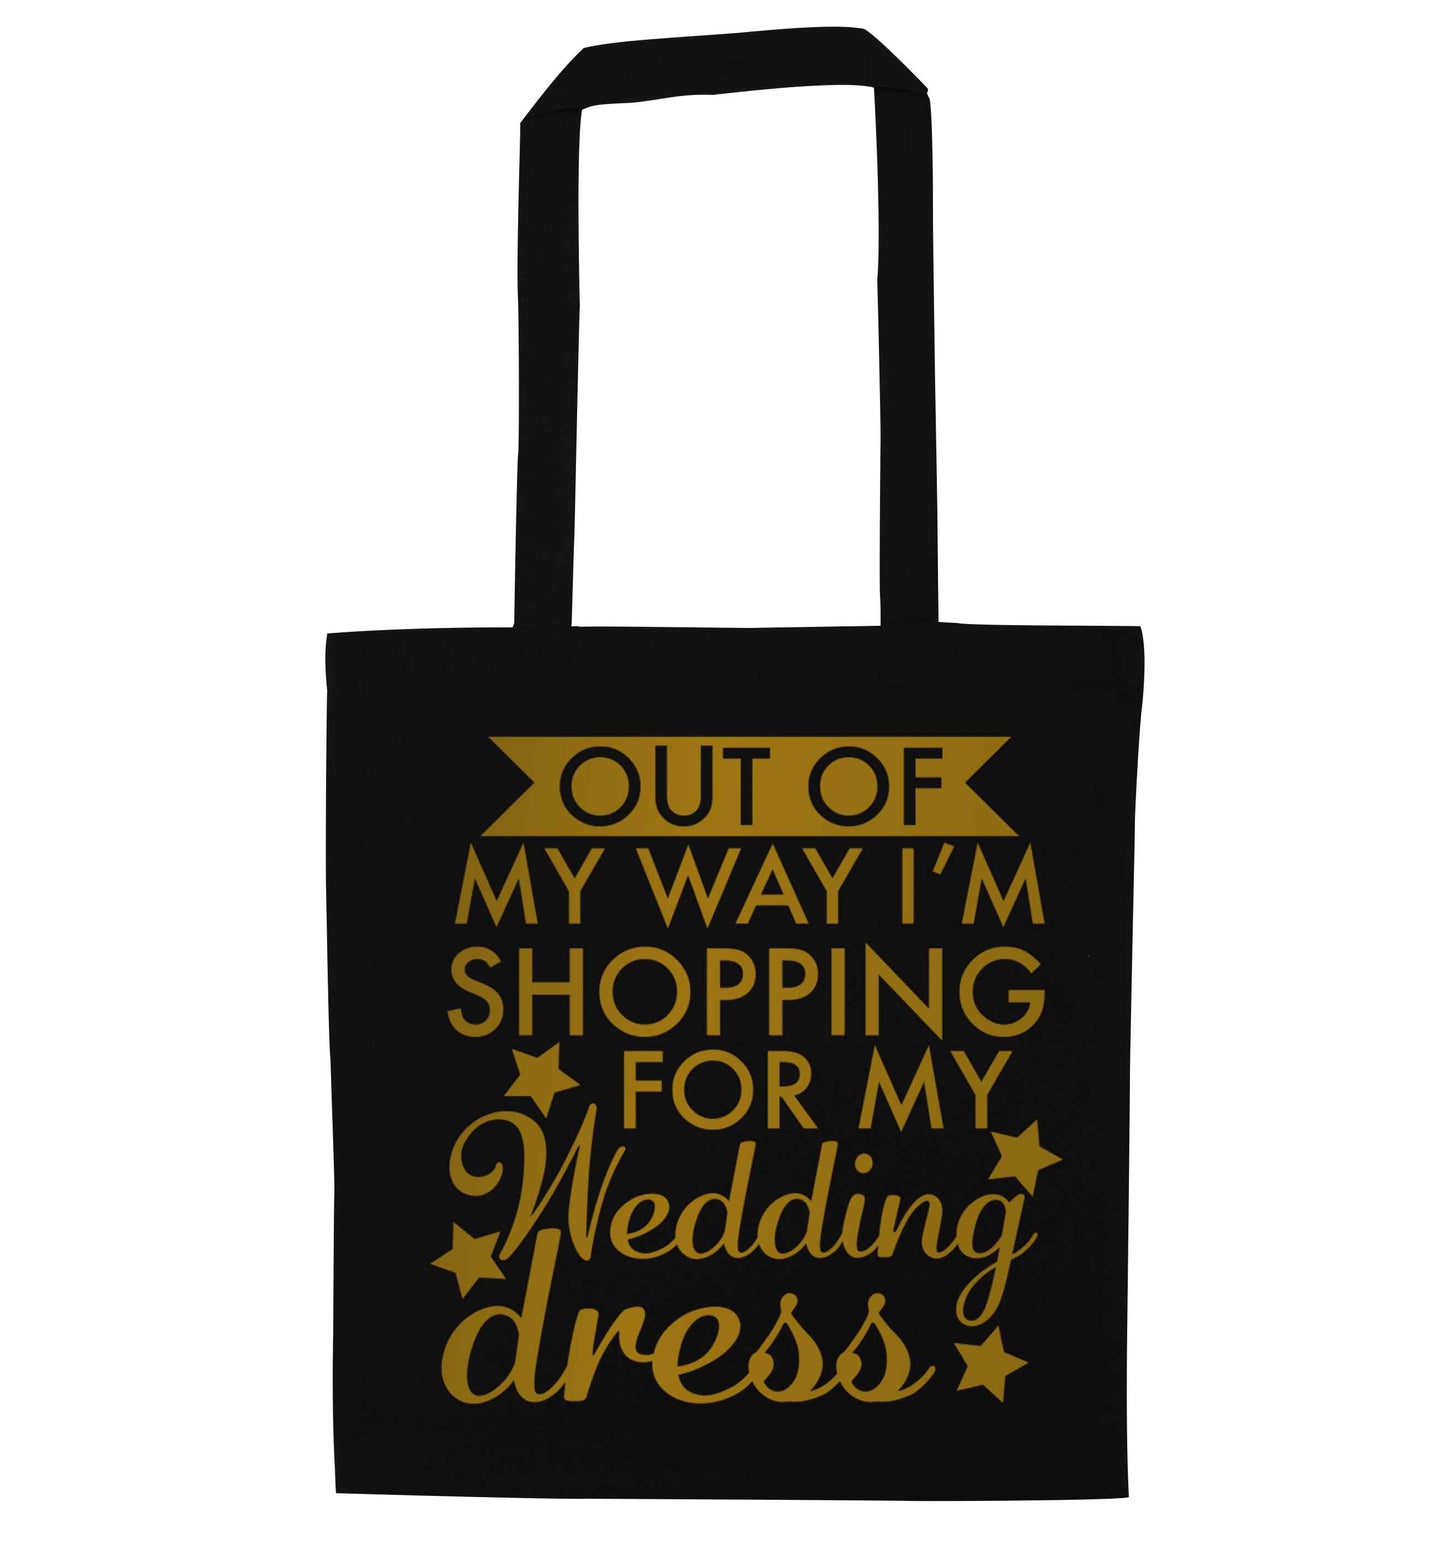 Out of my way I'm shopping for my wedding dress black tote bag